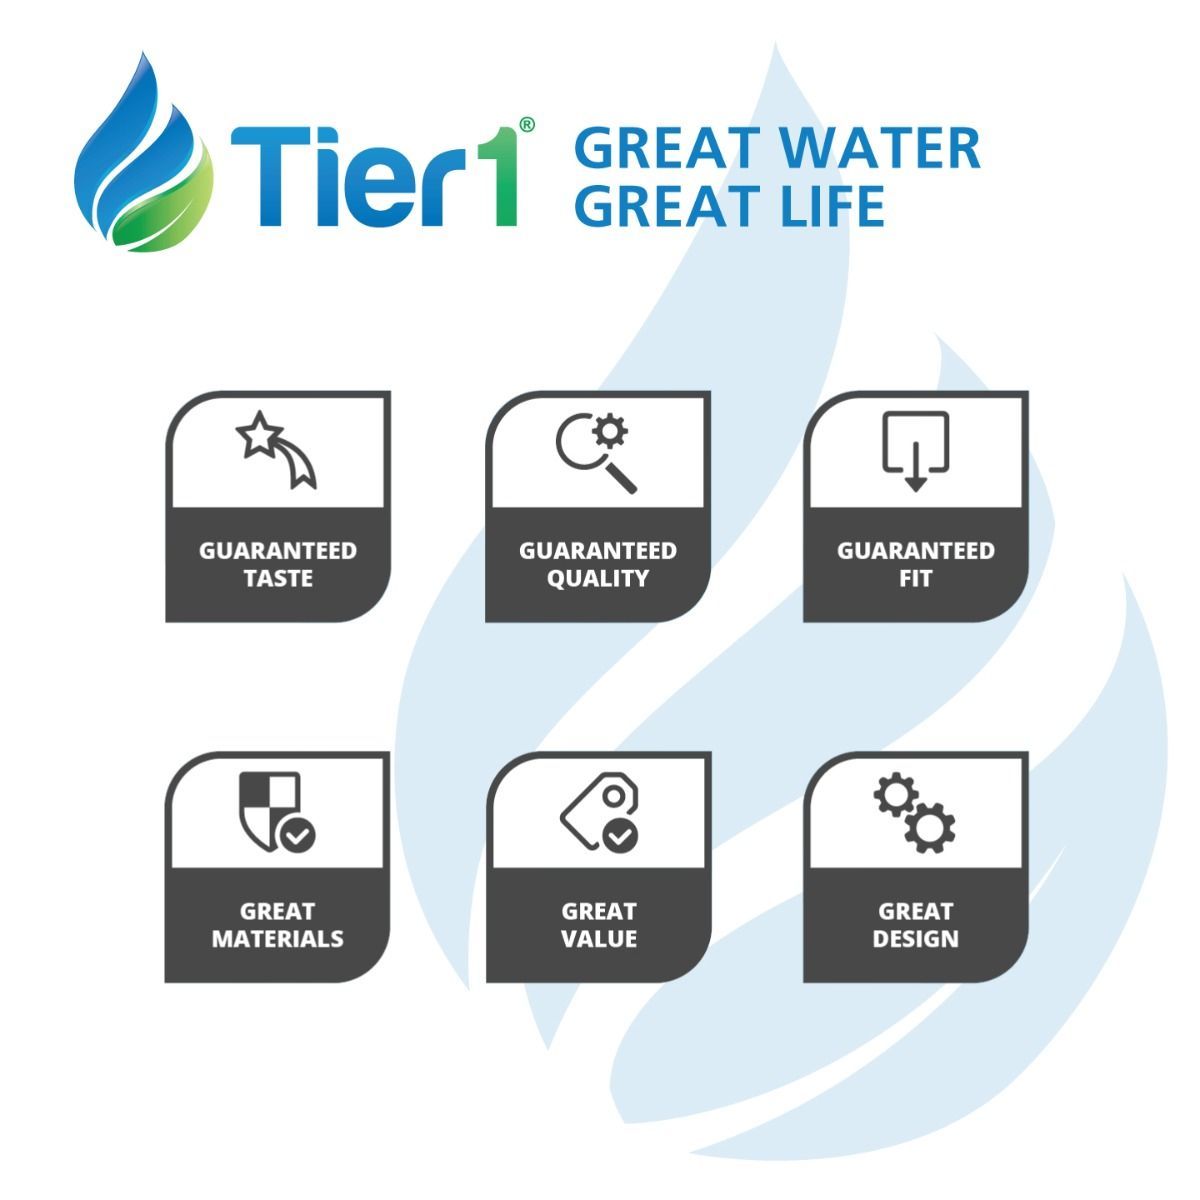 Tier1 Waterway Clearwater 817-0075N Comparable Pool and Spa Filter Replacement